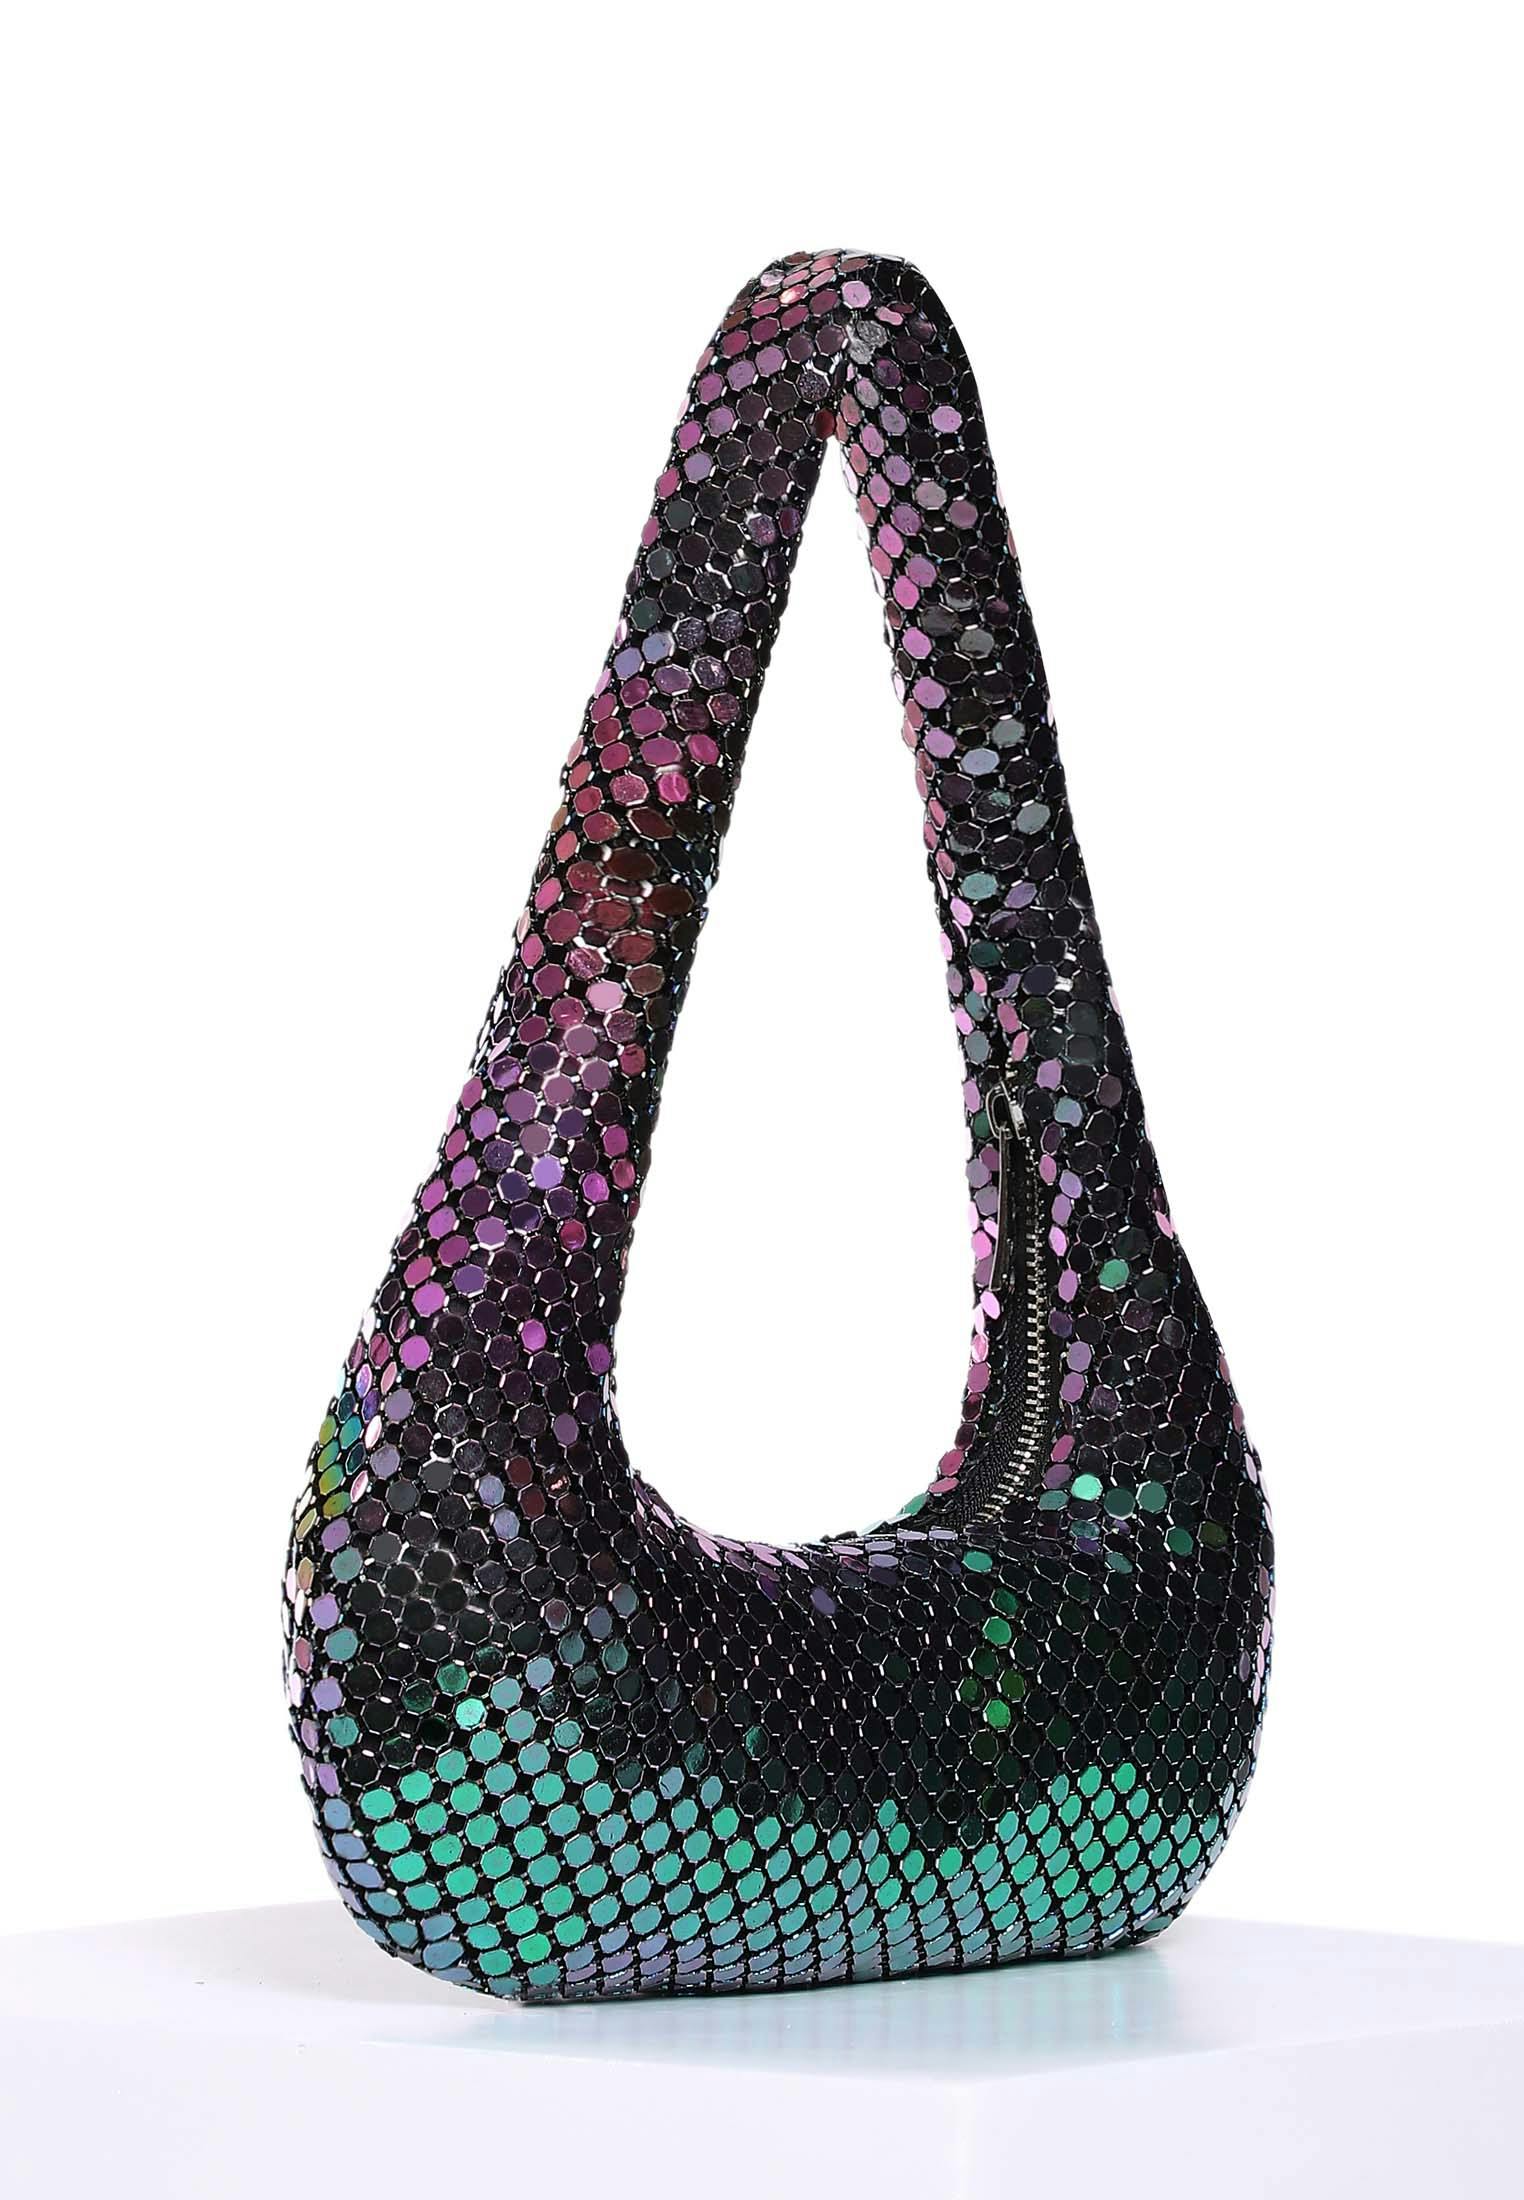 Mermaid Chainmail Shoulder Bag, a product by Lola's